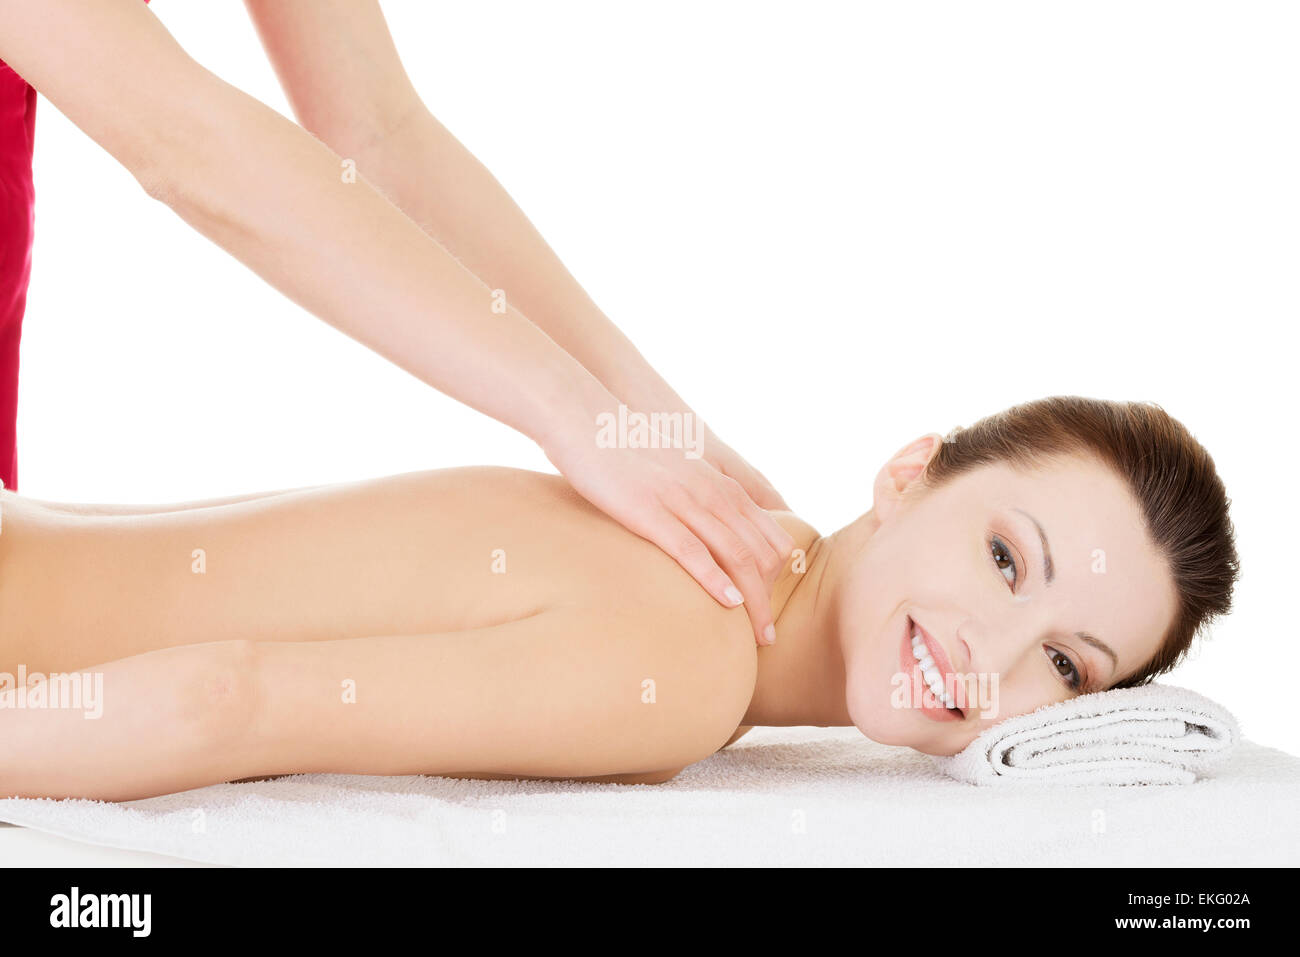 Preaty woman relaxing beeing massaged in spa Stock Photo